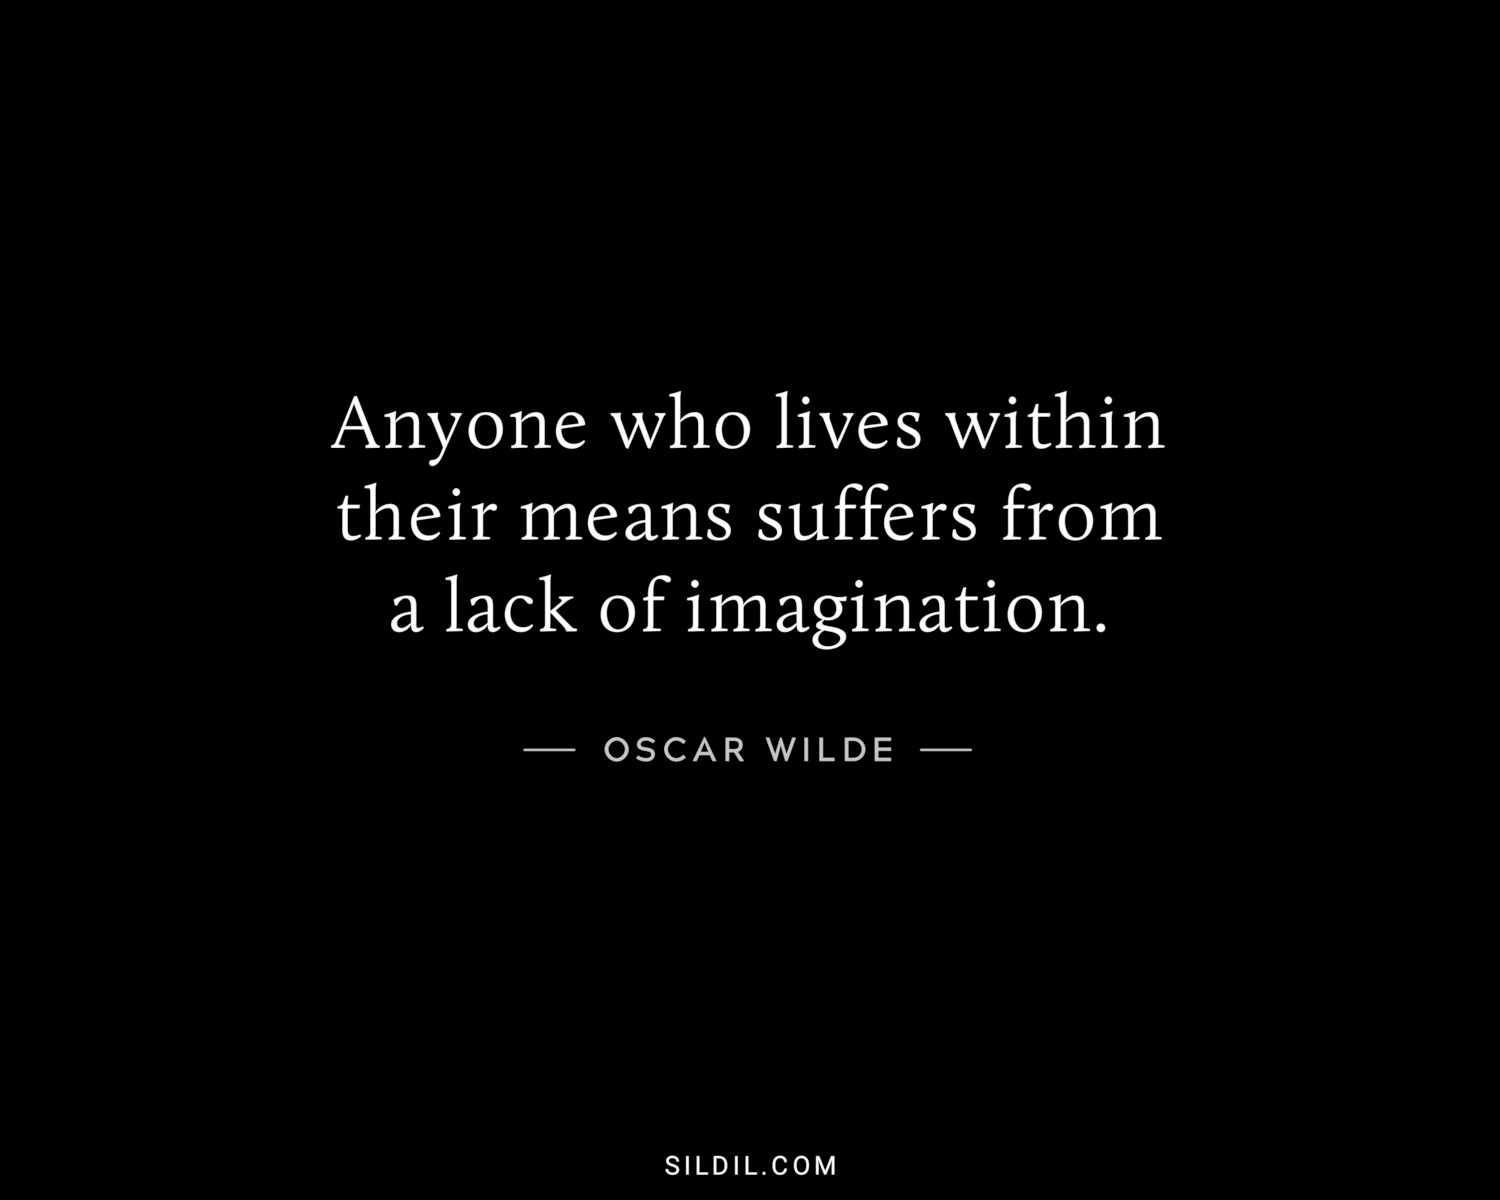 Anyone who lives within their means suffers from a lack of imagination.